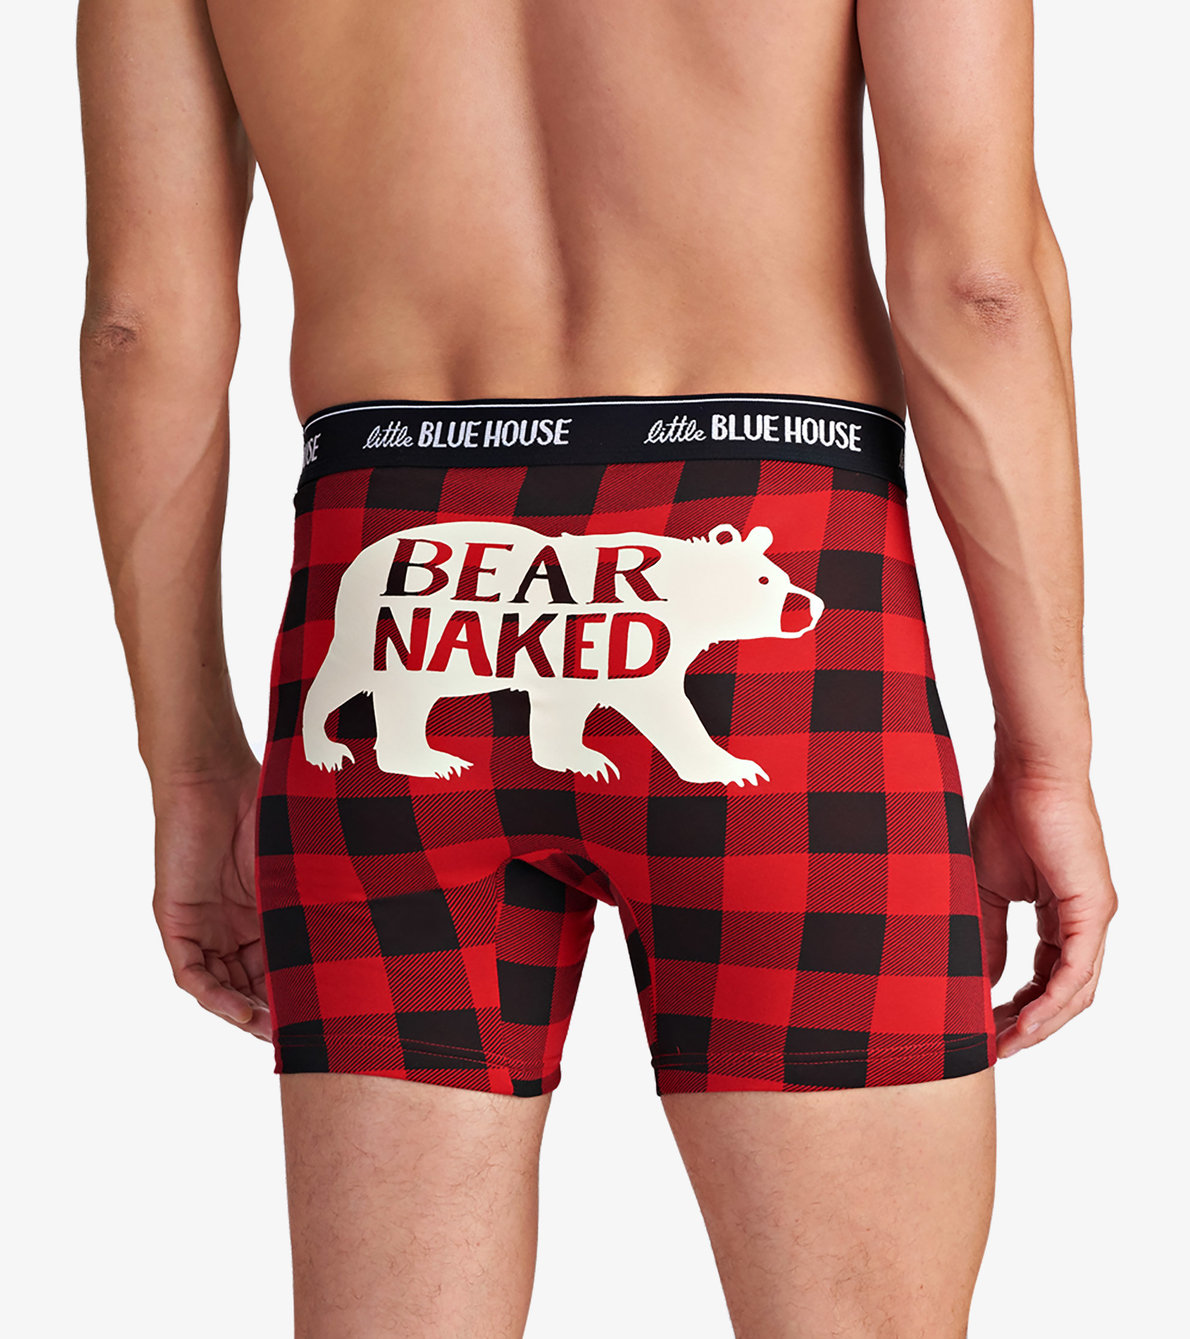 View larger image of Bear Naked Men's Boxer Briefs